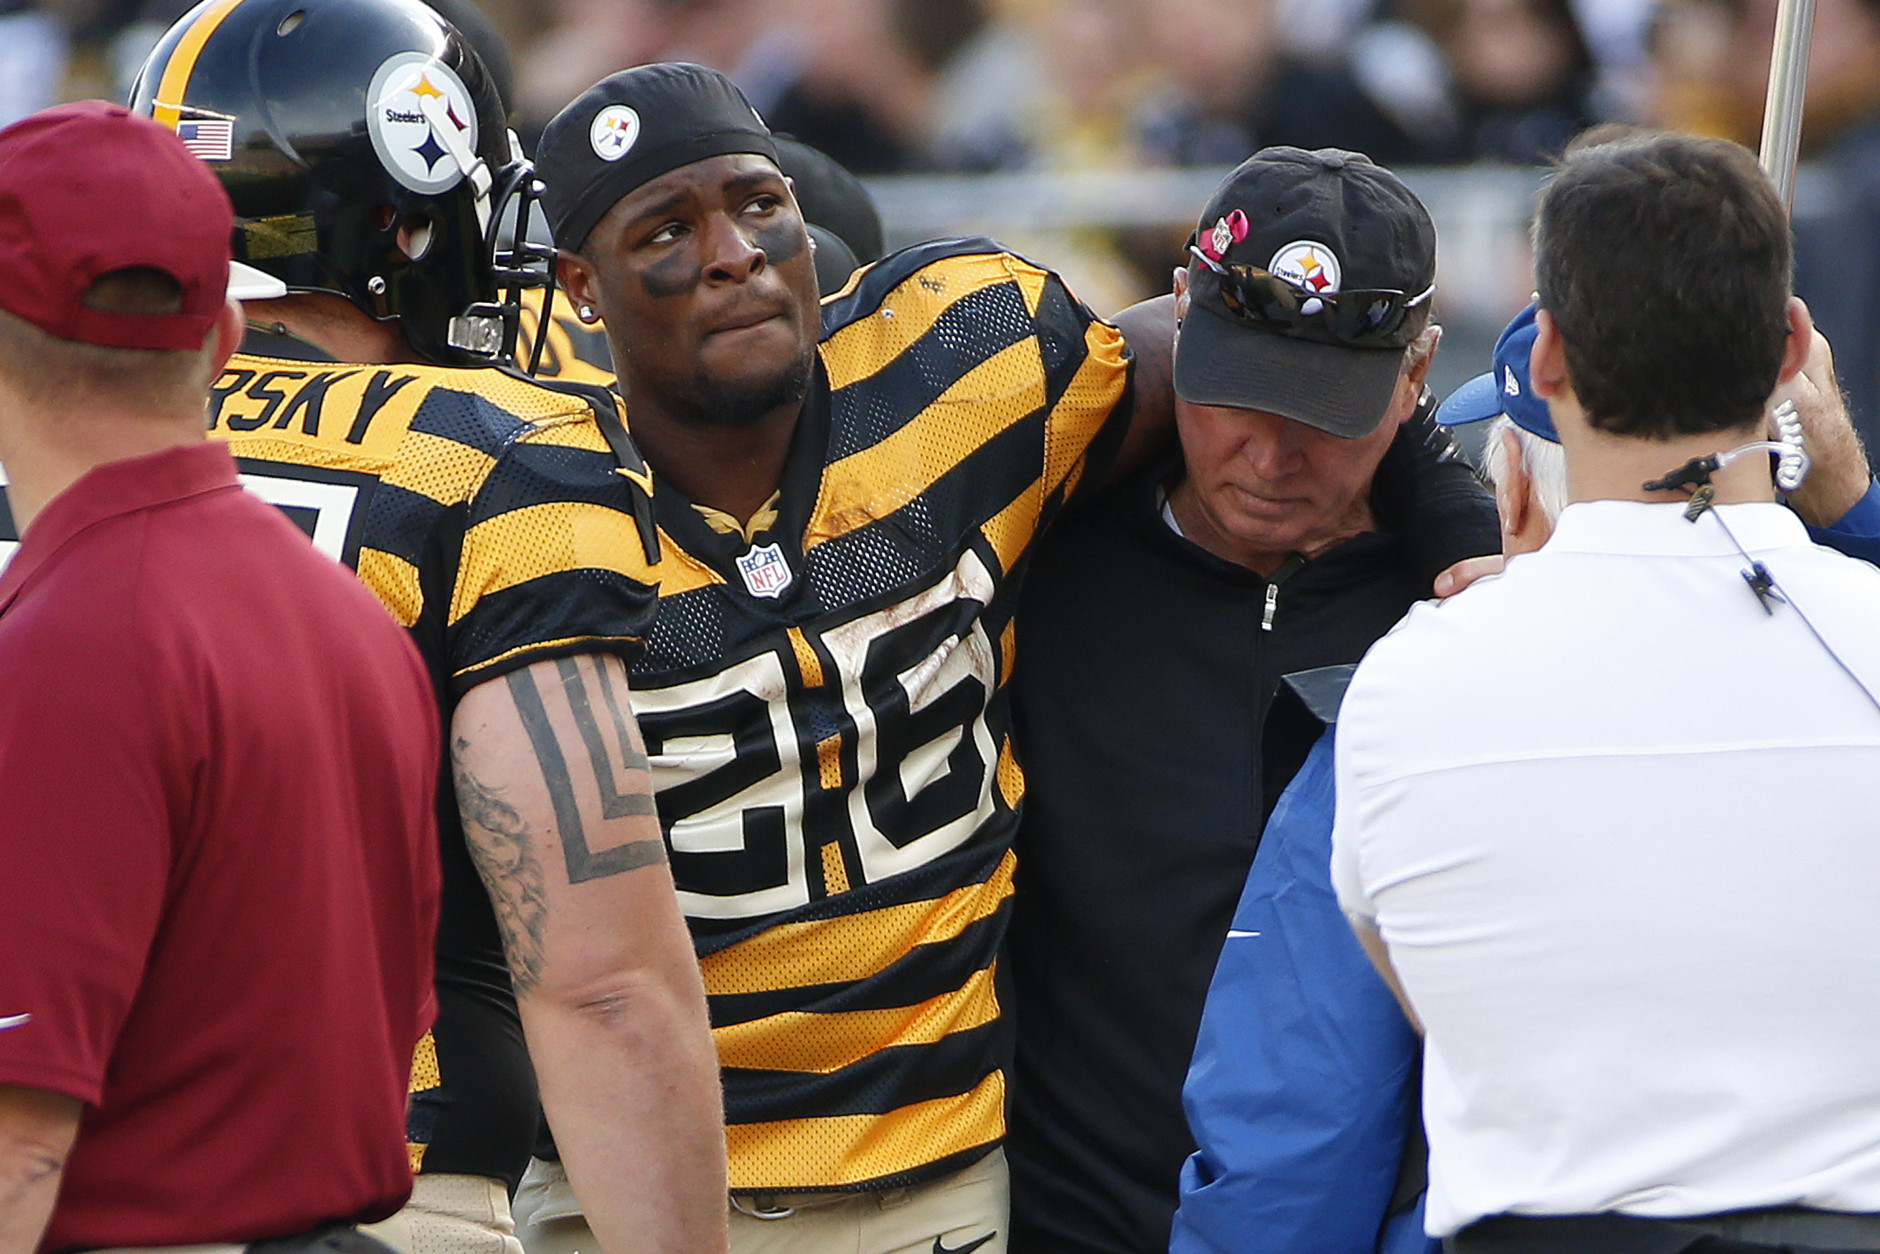 Pittsburgh Steelers running back Pittsburgh Steelers running back Le'Veon Bell (26) is helped by a team doctor after injuring his right knee in the first half of an NFL football game against the Cincinnati Bengals, Sunday, Nov. 1, 2015 in Pittsburgh. Bell was driven off the field, and did not return to the game. (AP Photo/Gene Puskar)